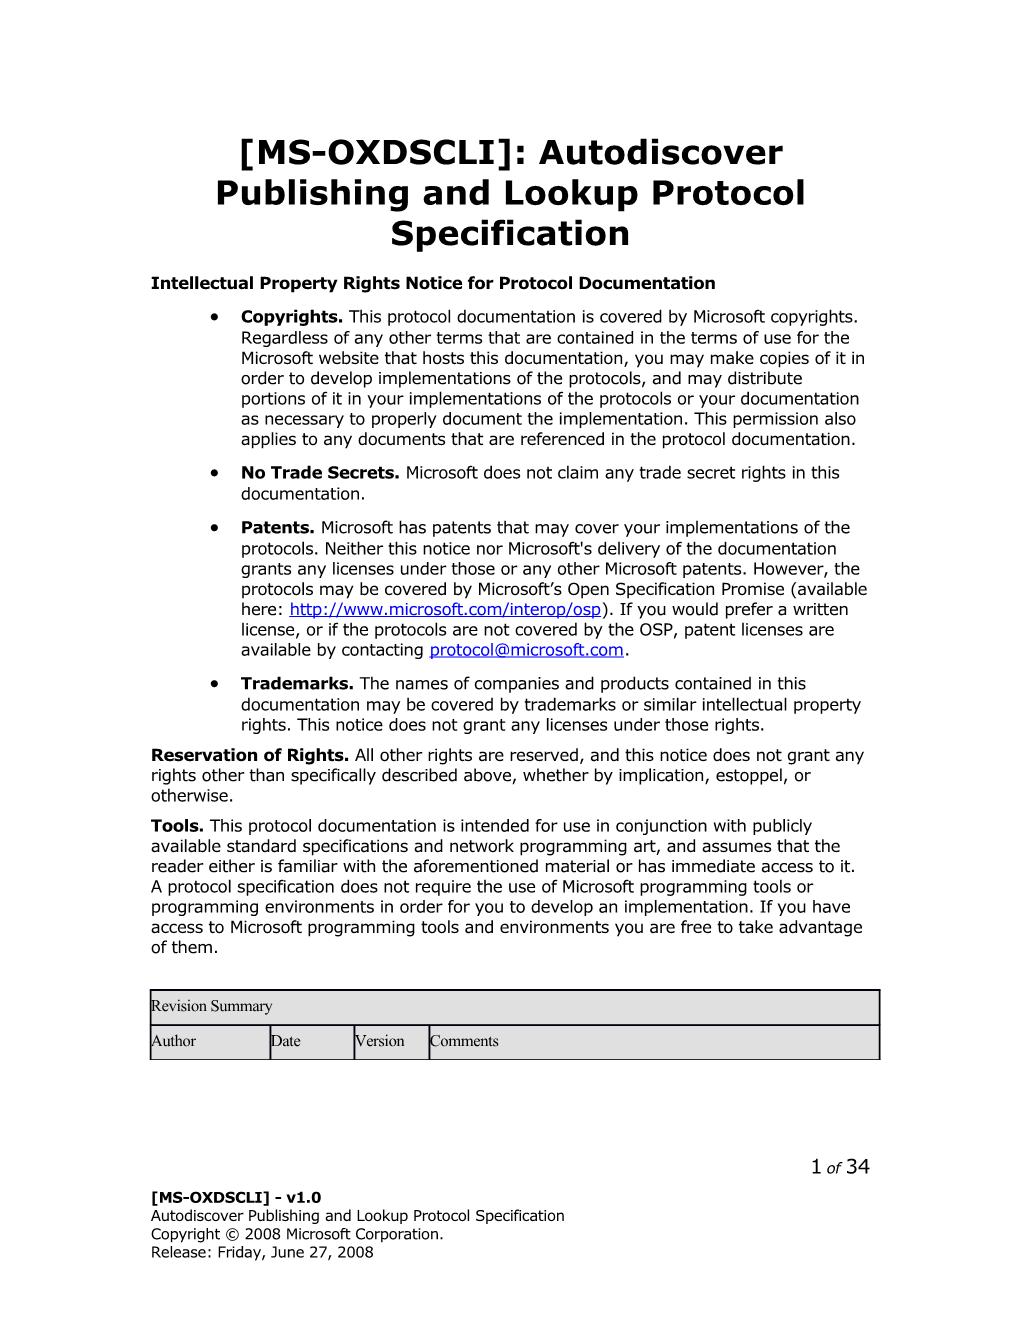 MS-OXDSCLI : Autodiscover Publishing and Lookup Protocol Specification